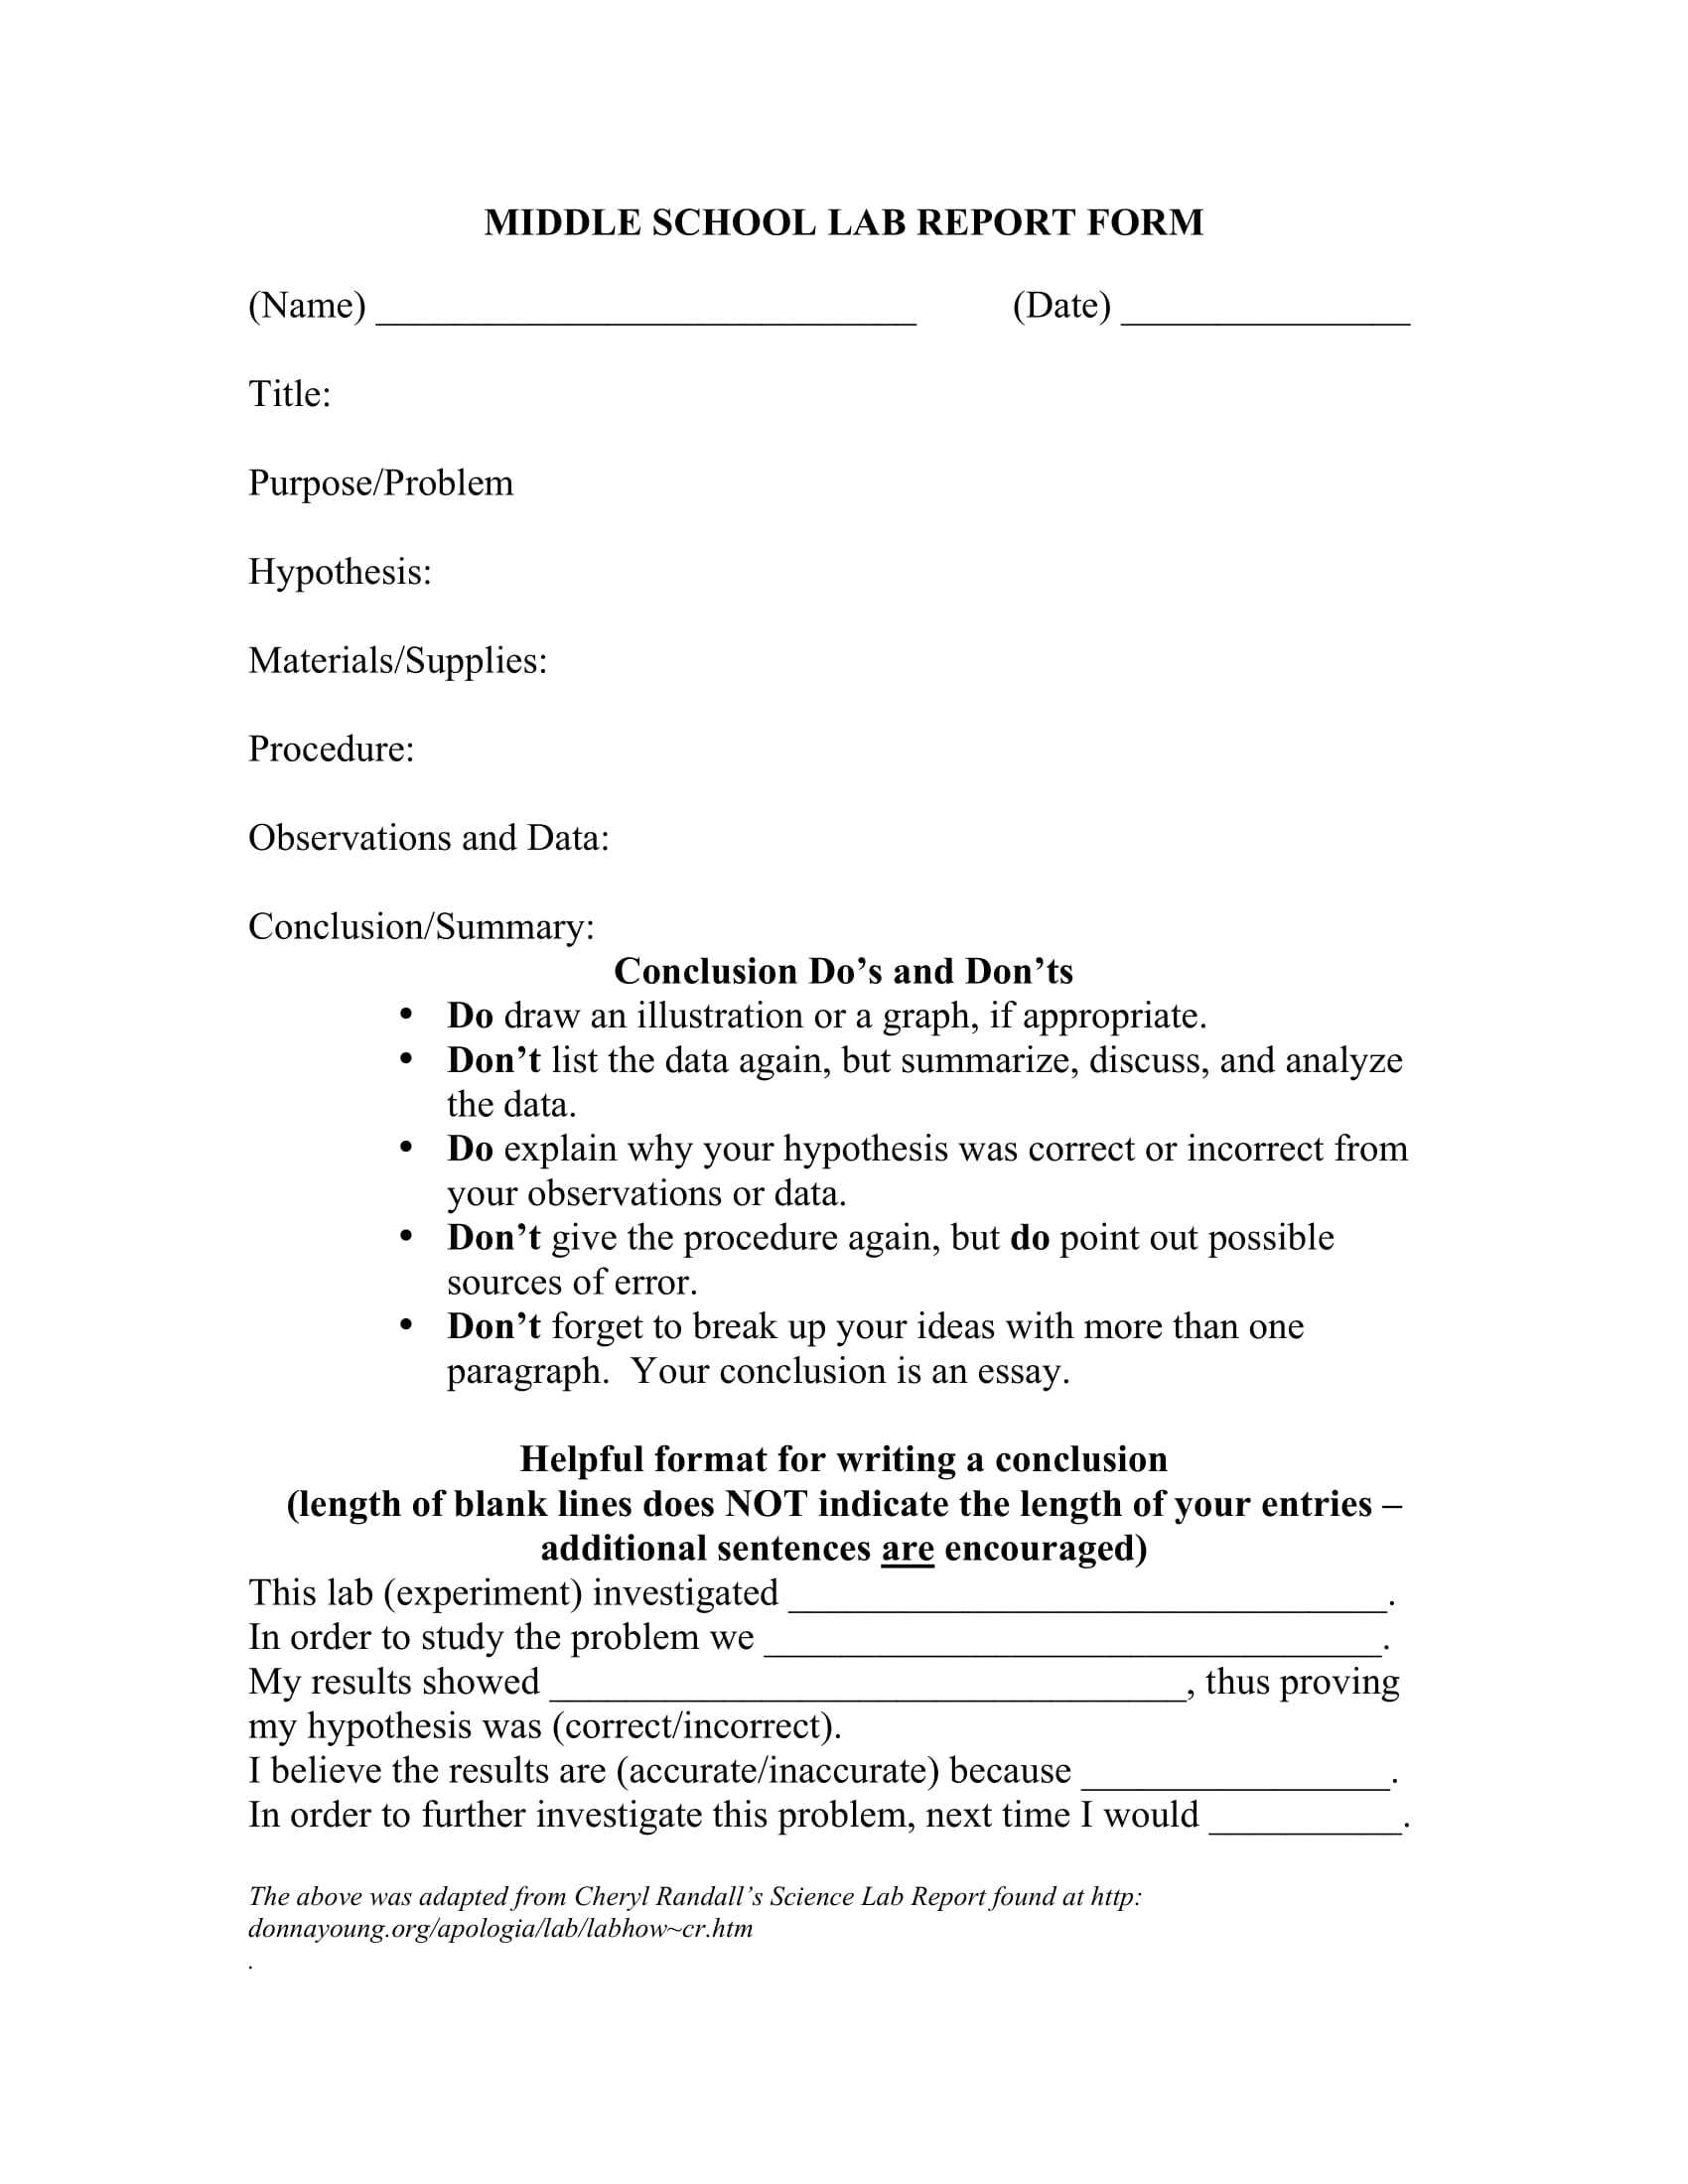 Free 11+ Laboratory Report Forms In Pdf | Ms Word In Lab Report Template Middle School